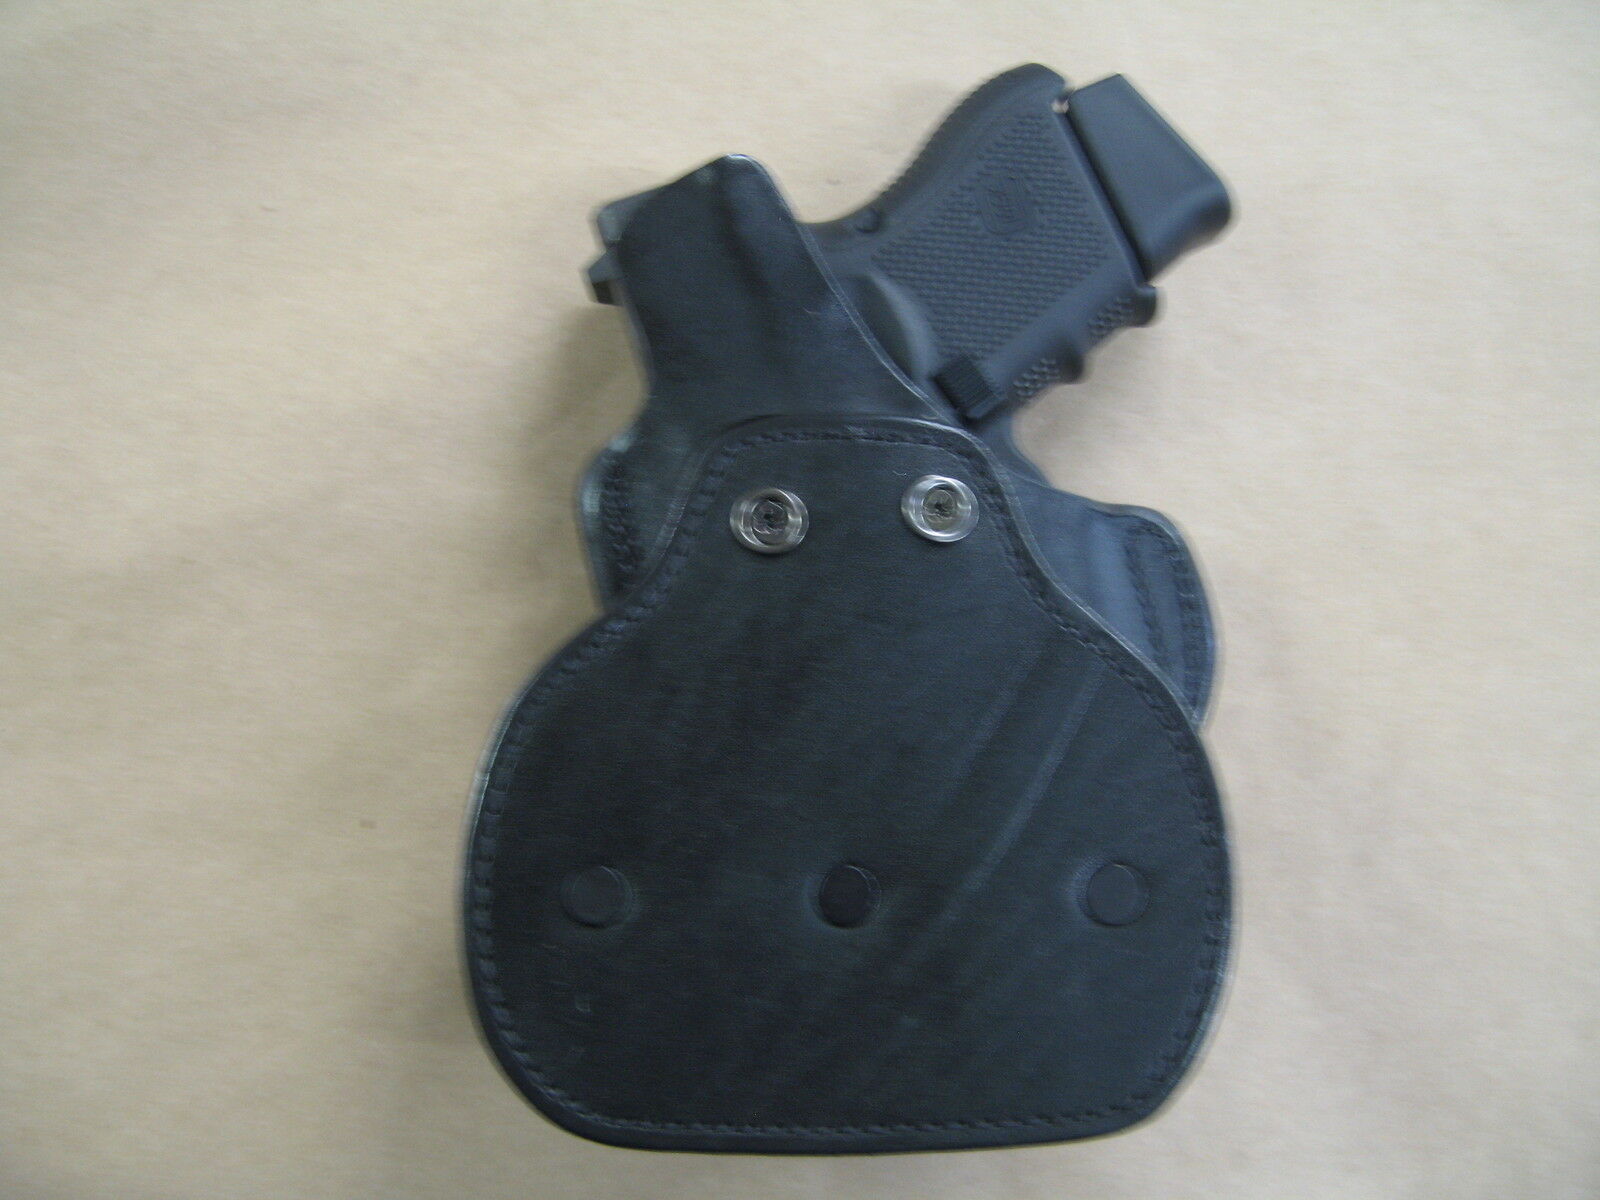 Sig Sauer P6 9mm 3.5" BBL #1395# Leather OWB Paddle Holster With Open Top Fits 